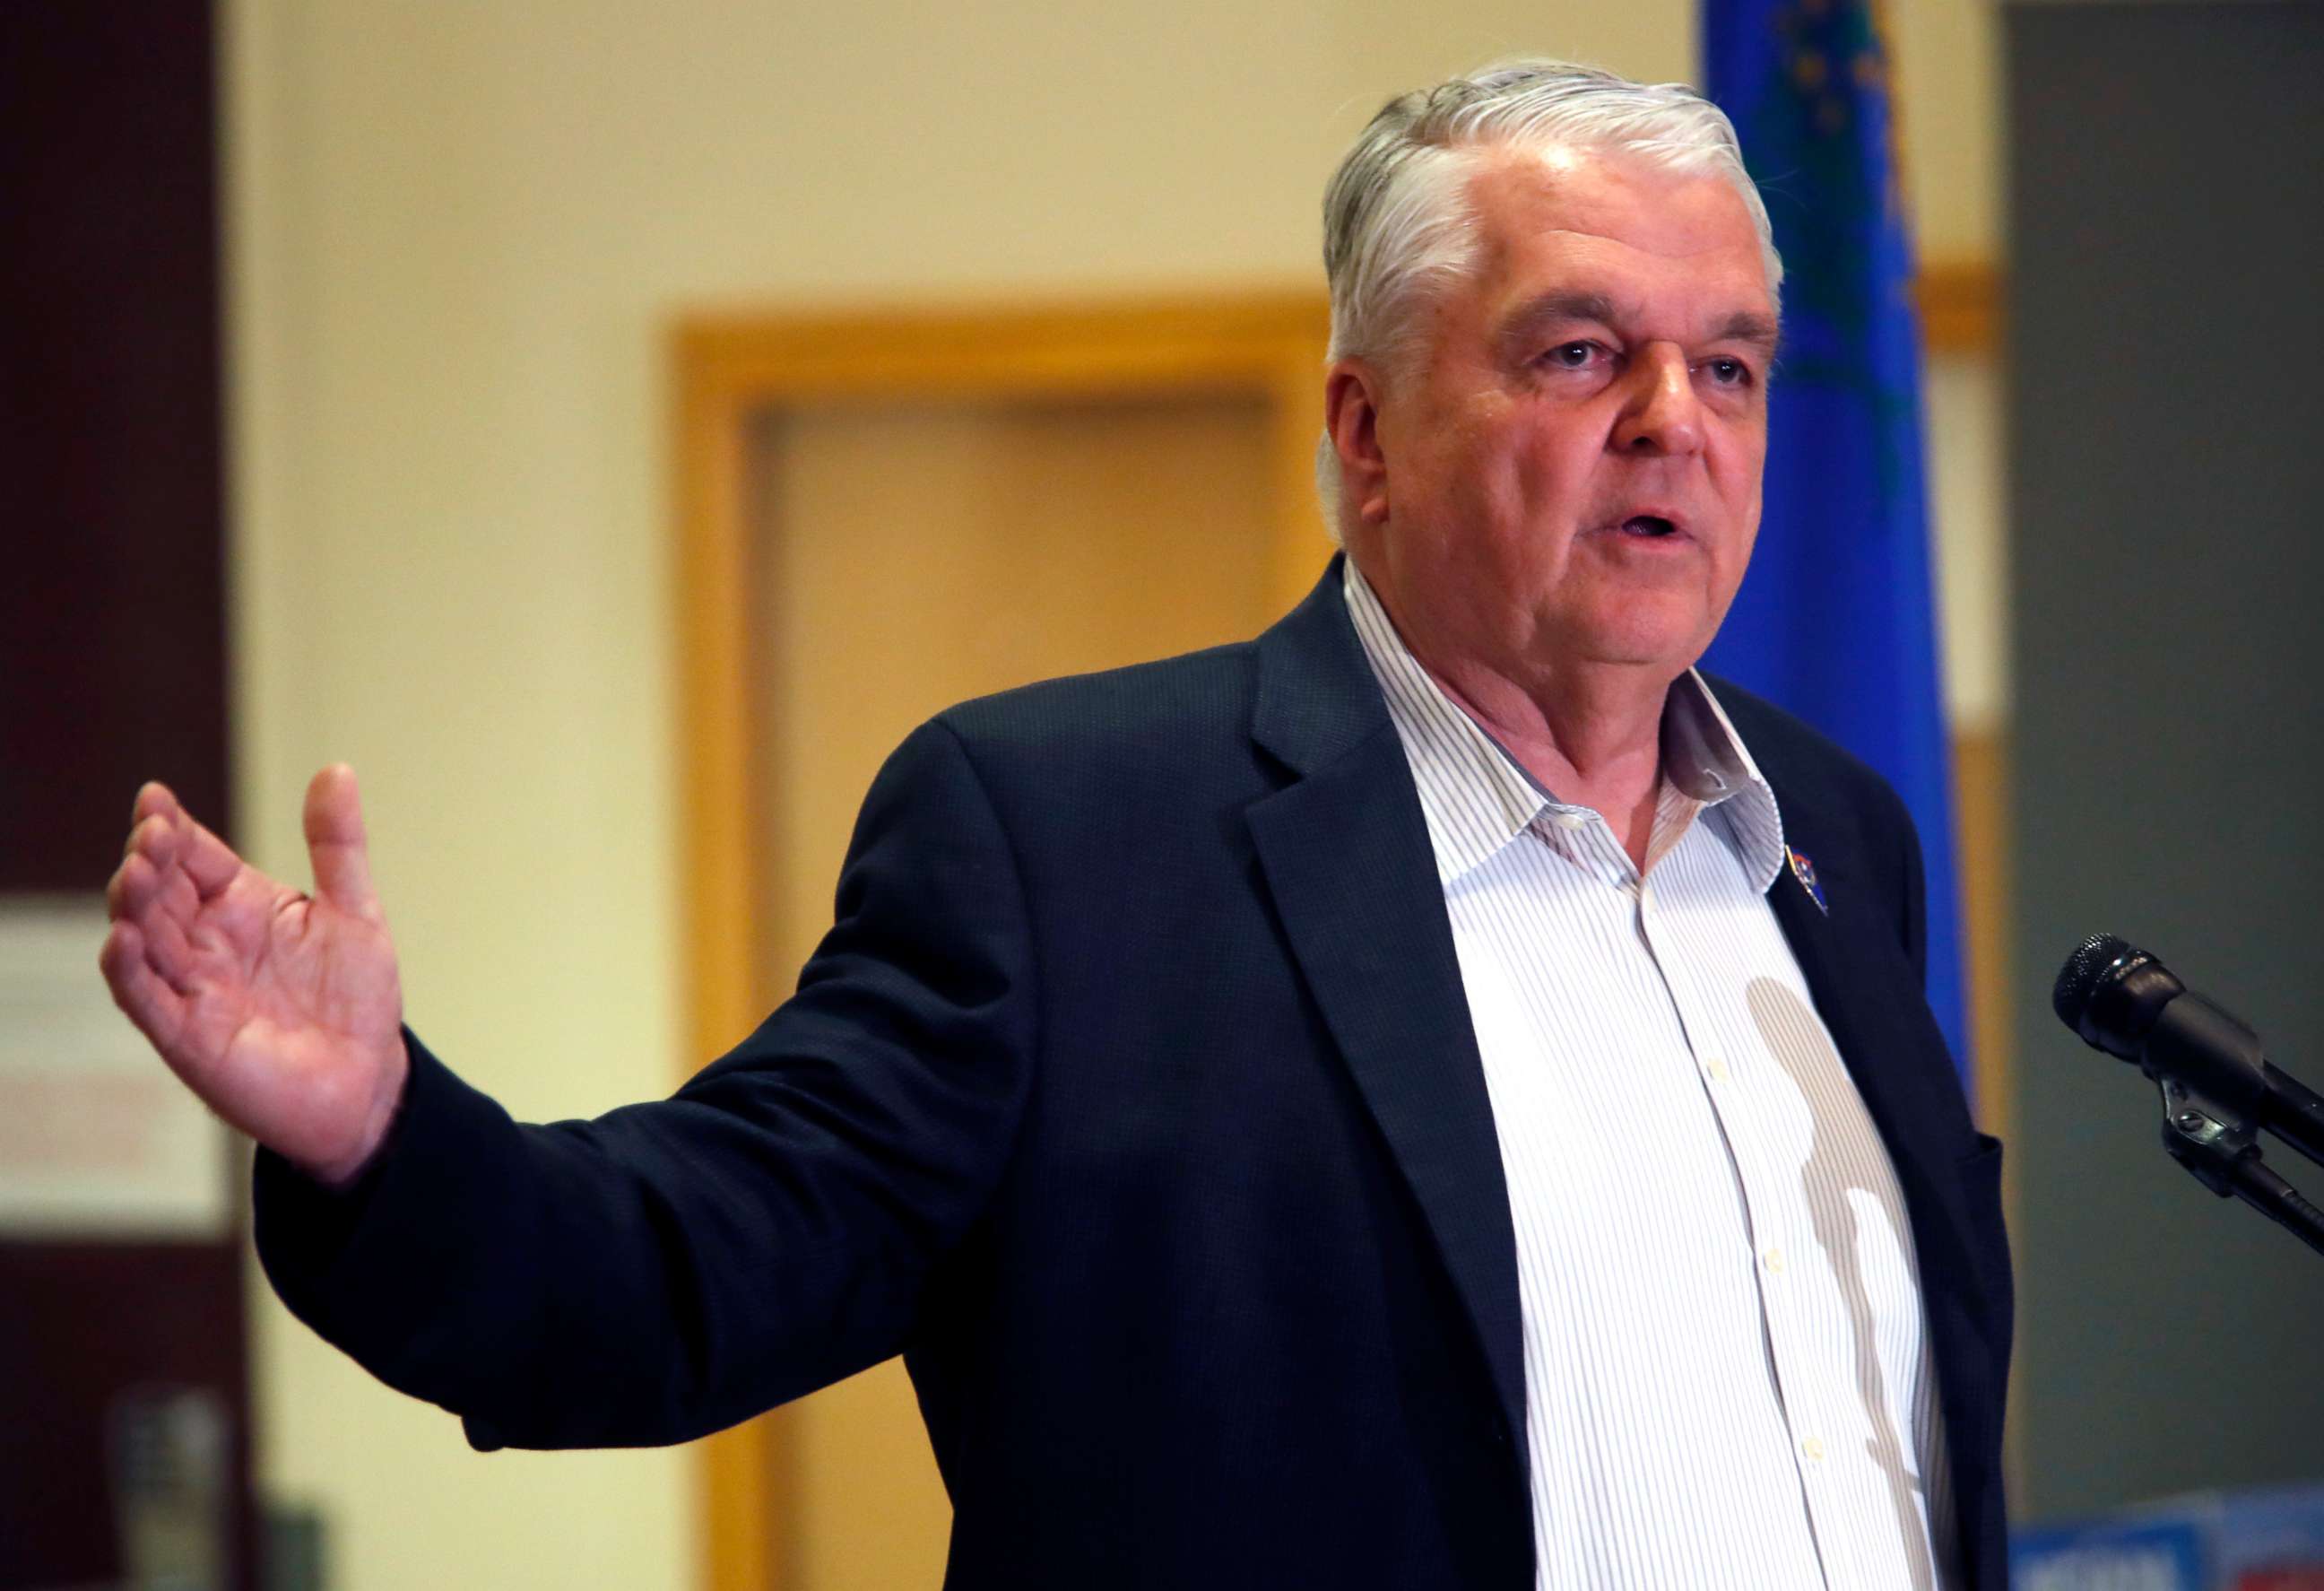 PHOTO: Nevada Gov. Steve Sisolak responds to a question during a news conference at the Sawyer State Building in Las Vegas, March 17, 2020.